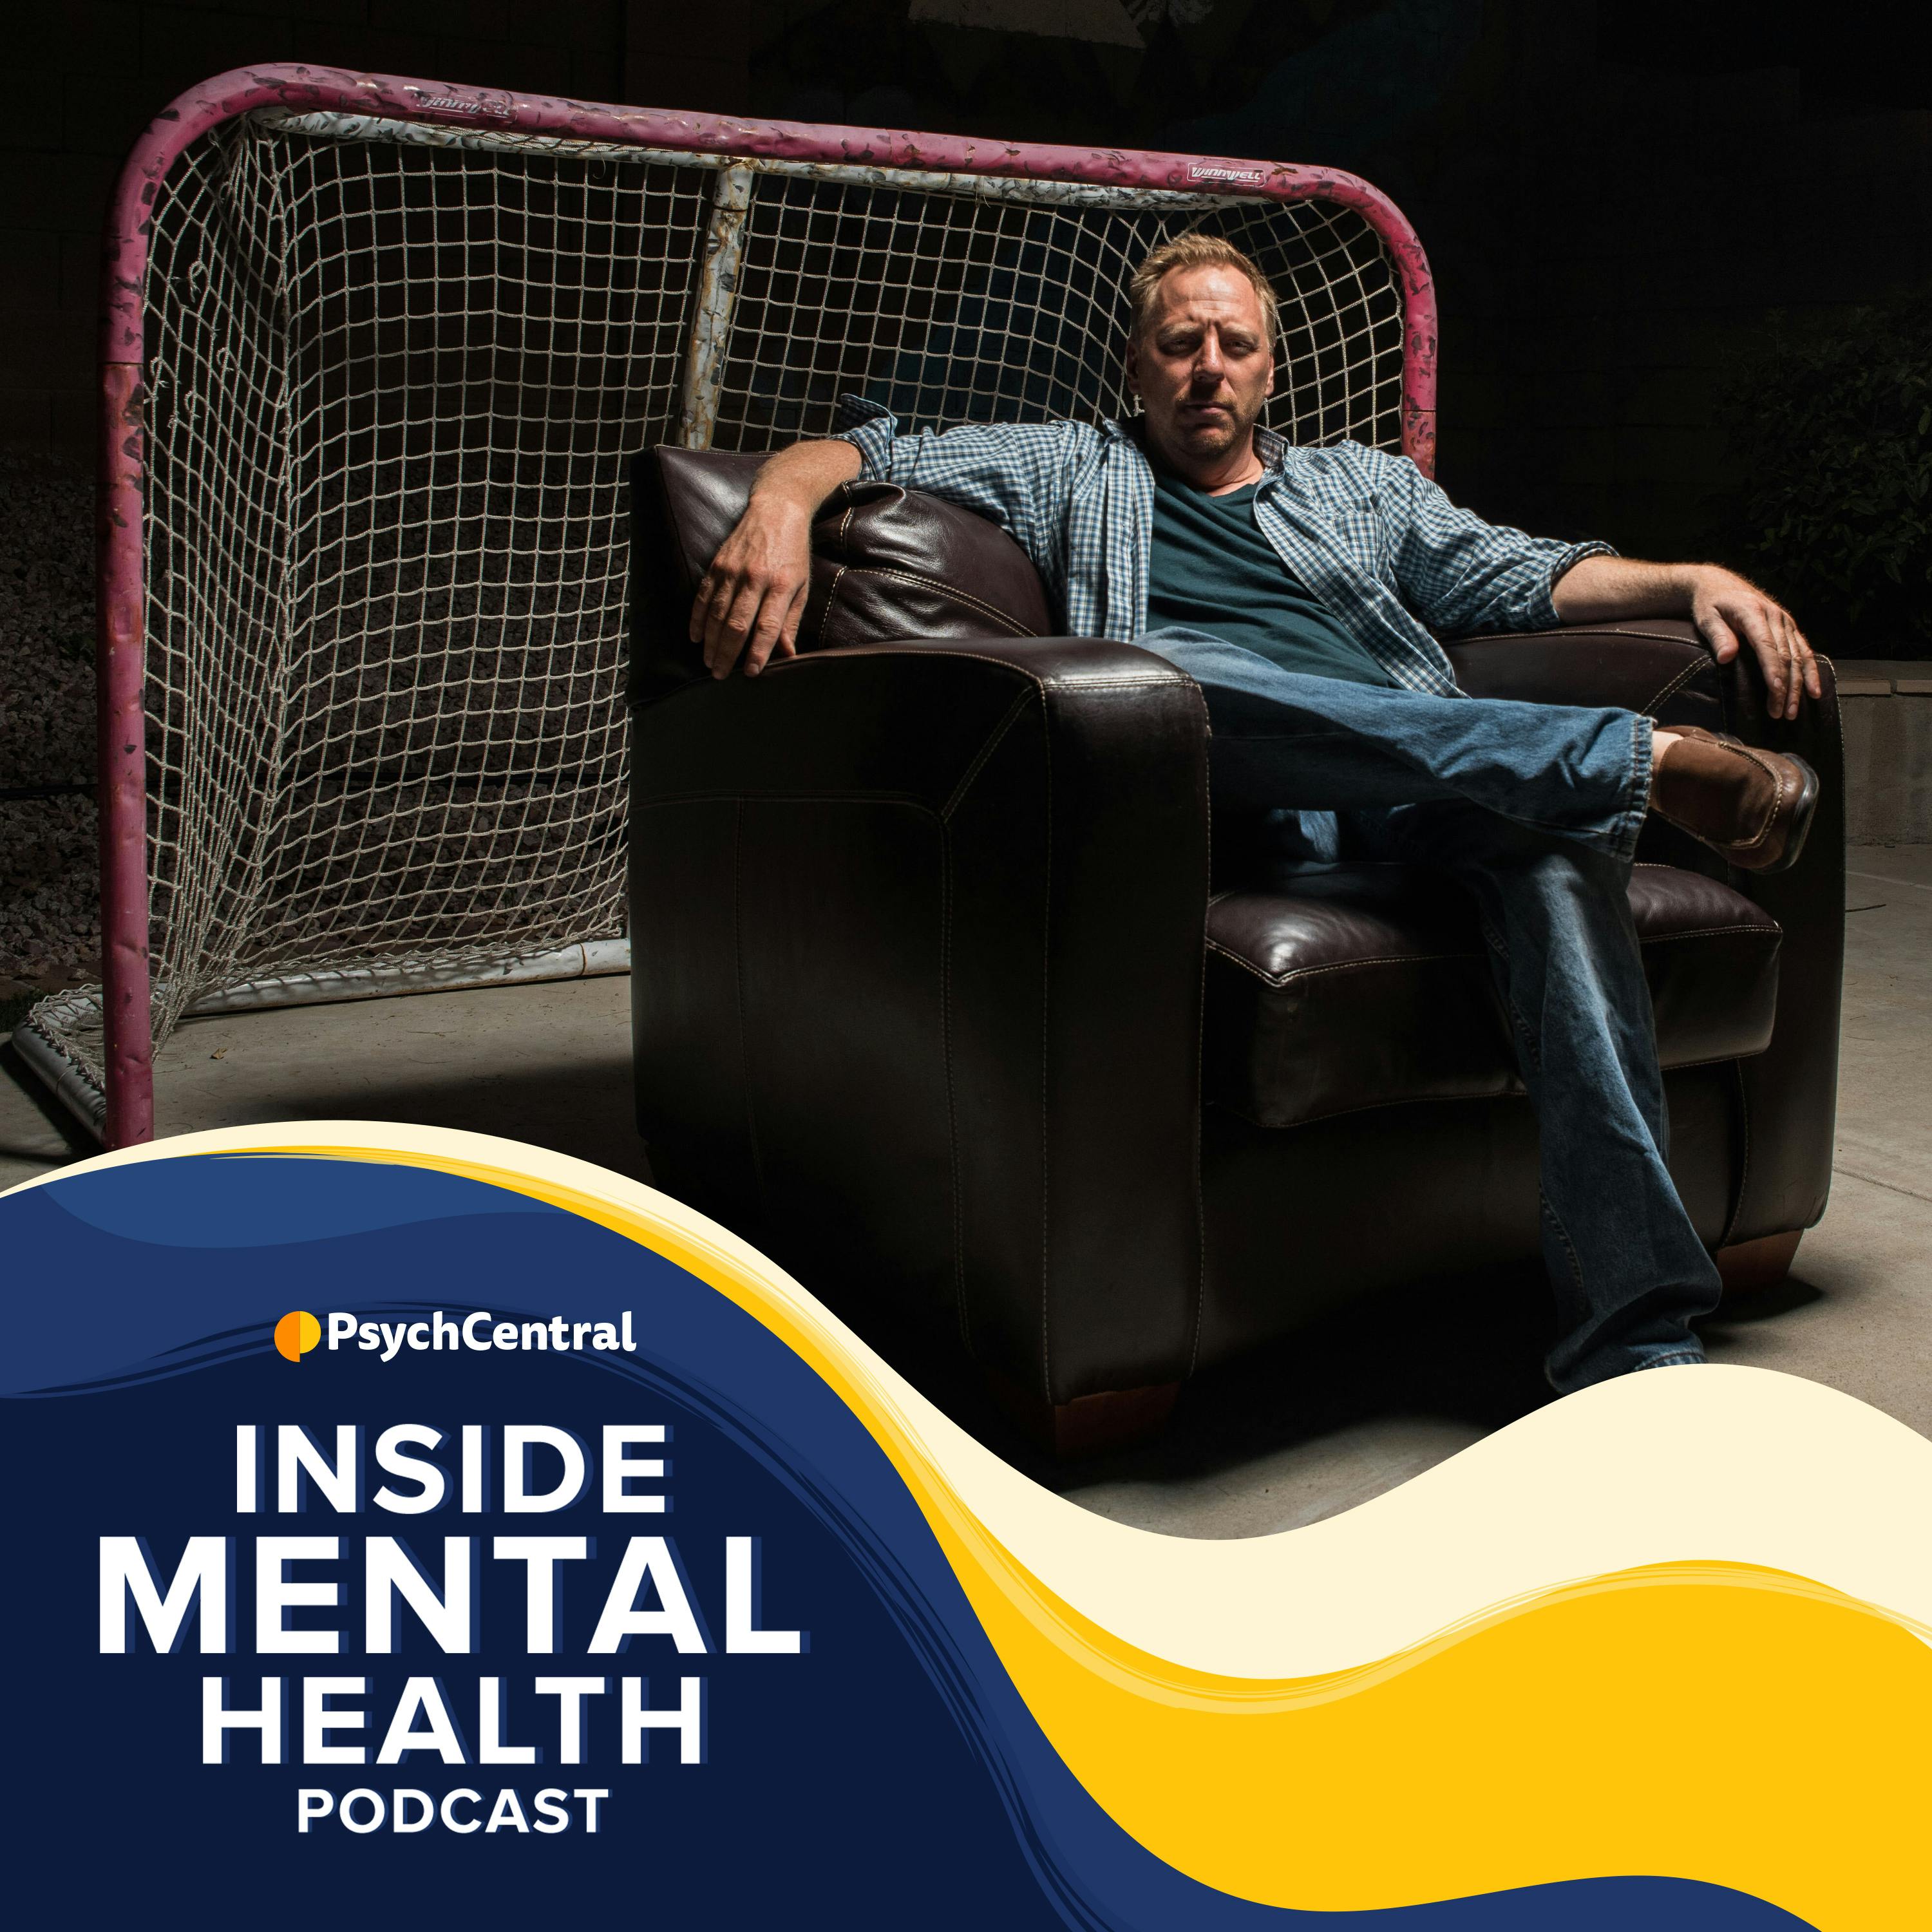 Can NHL Goalies Have OCD and Anxiety? (Featuring Corey Hirsch)